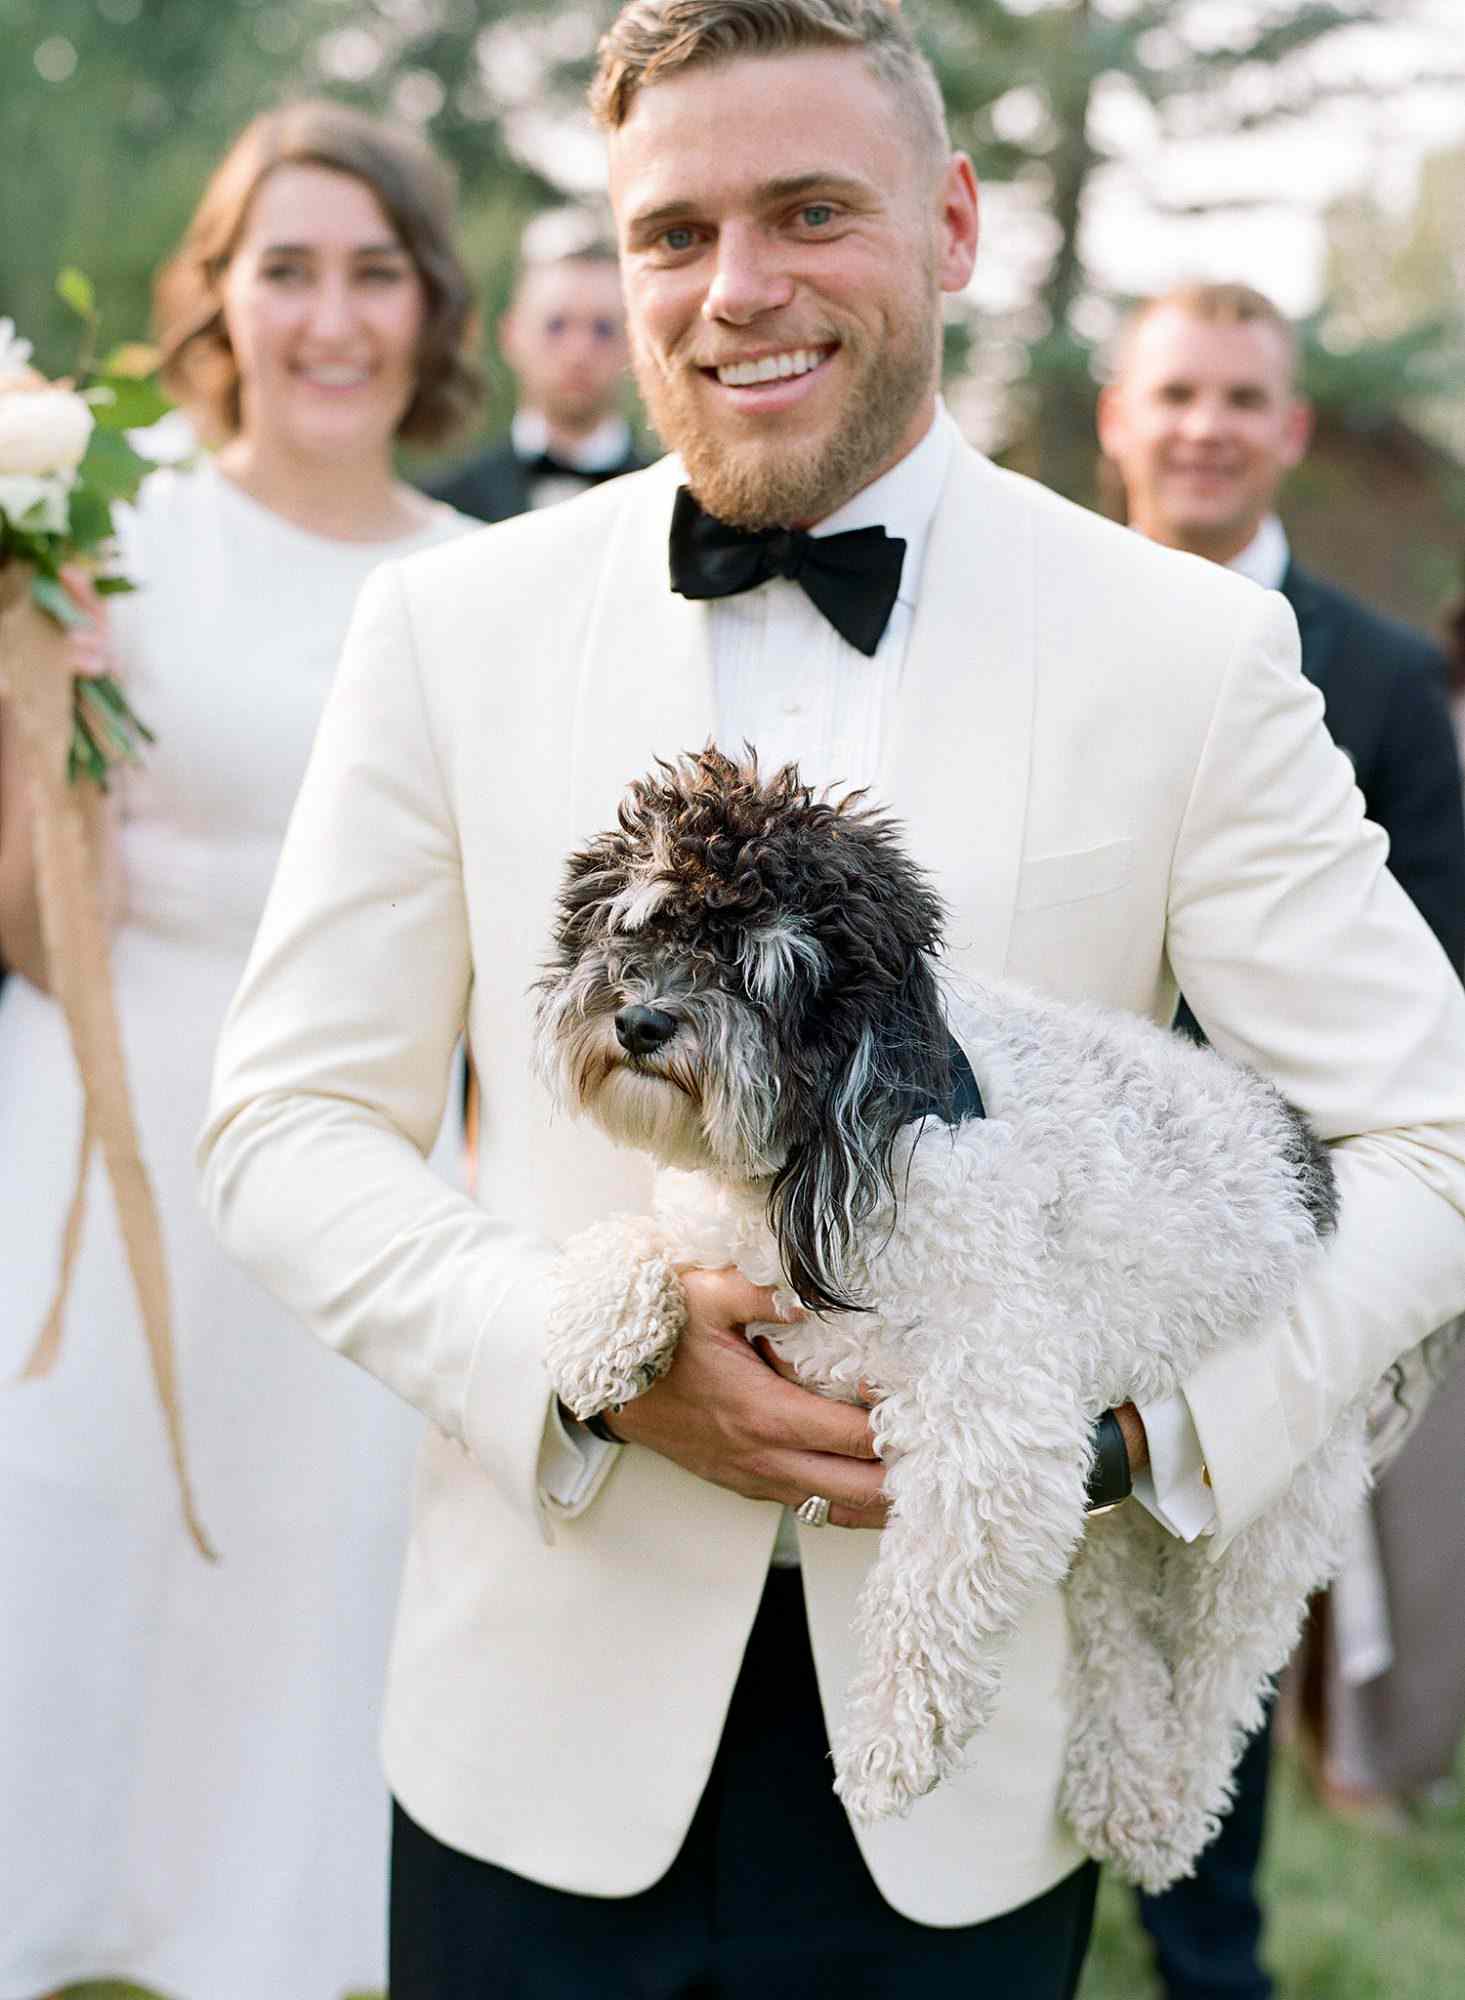 kaitlin jeremy wedding officiant with dog